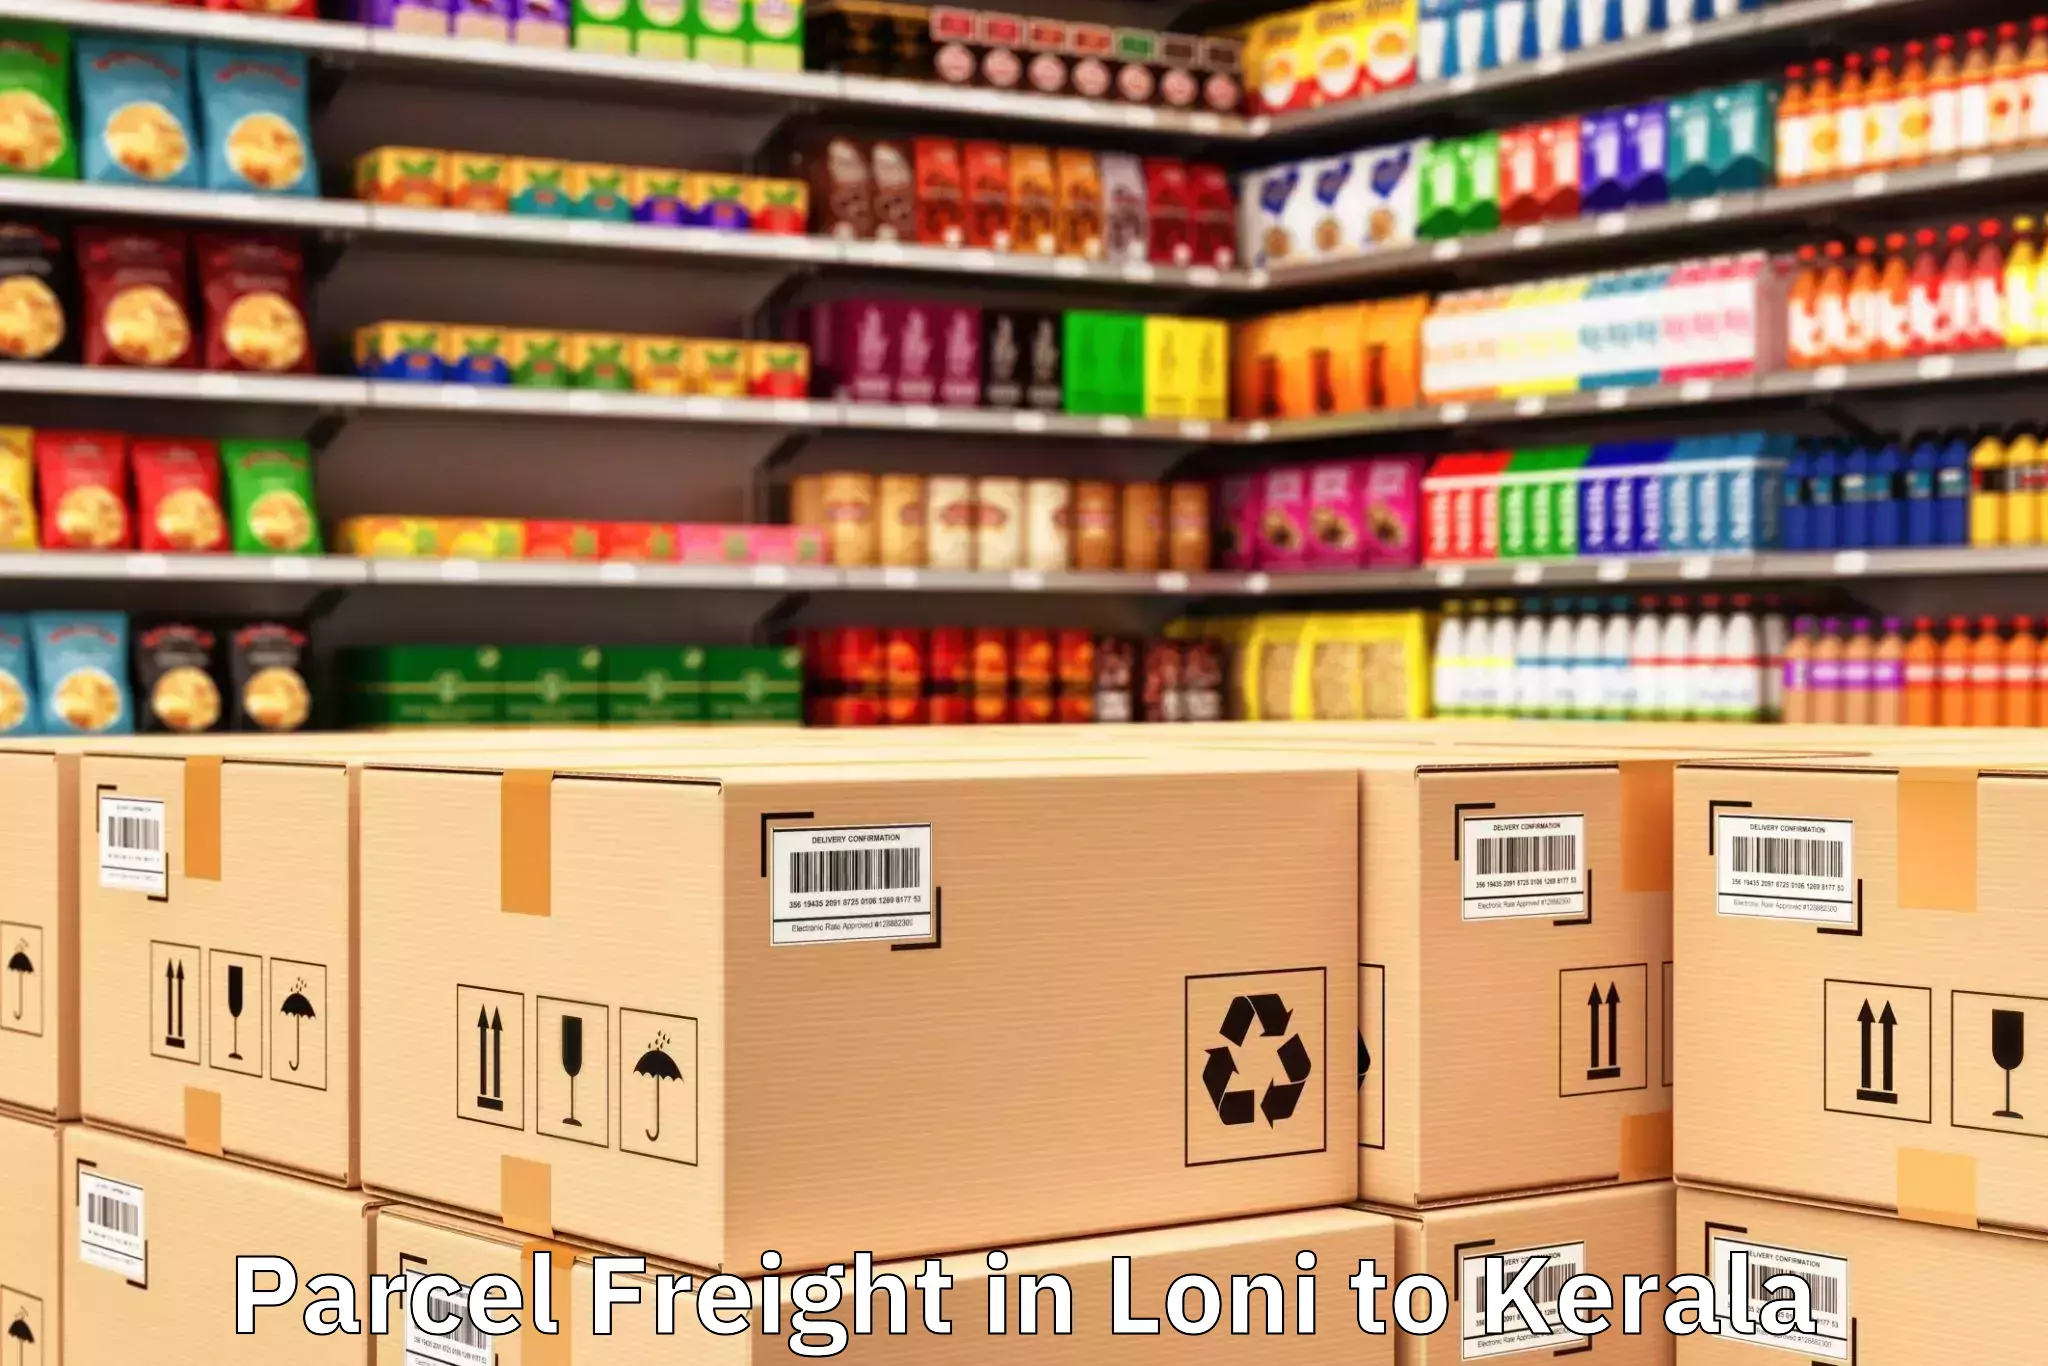 Efficient Loni to Ernakulam Parcel Freight